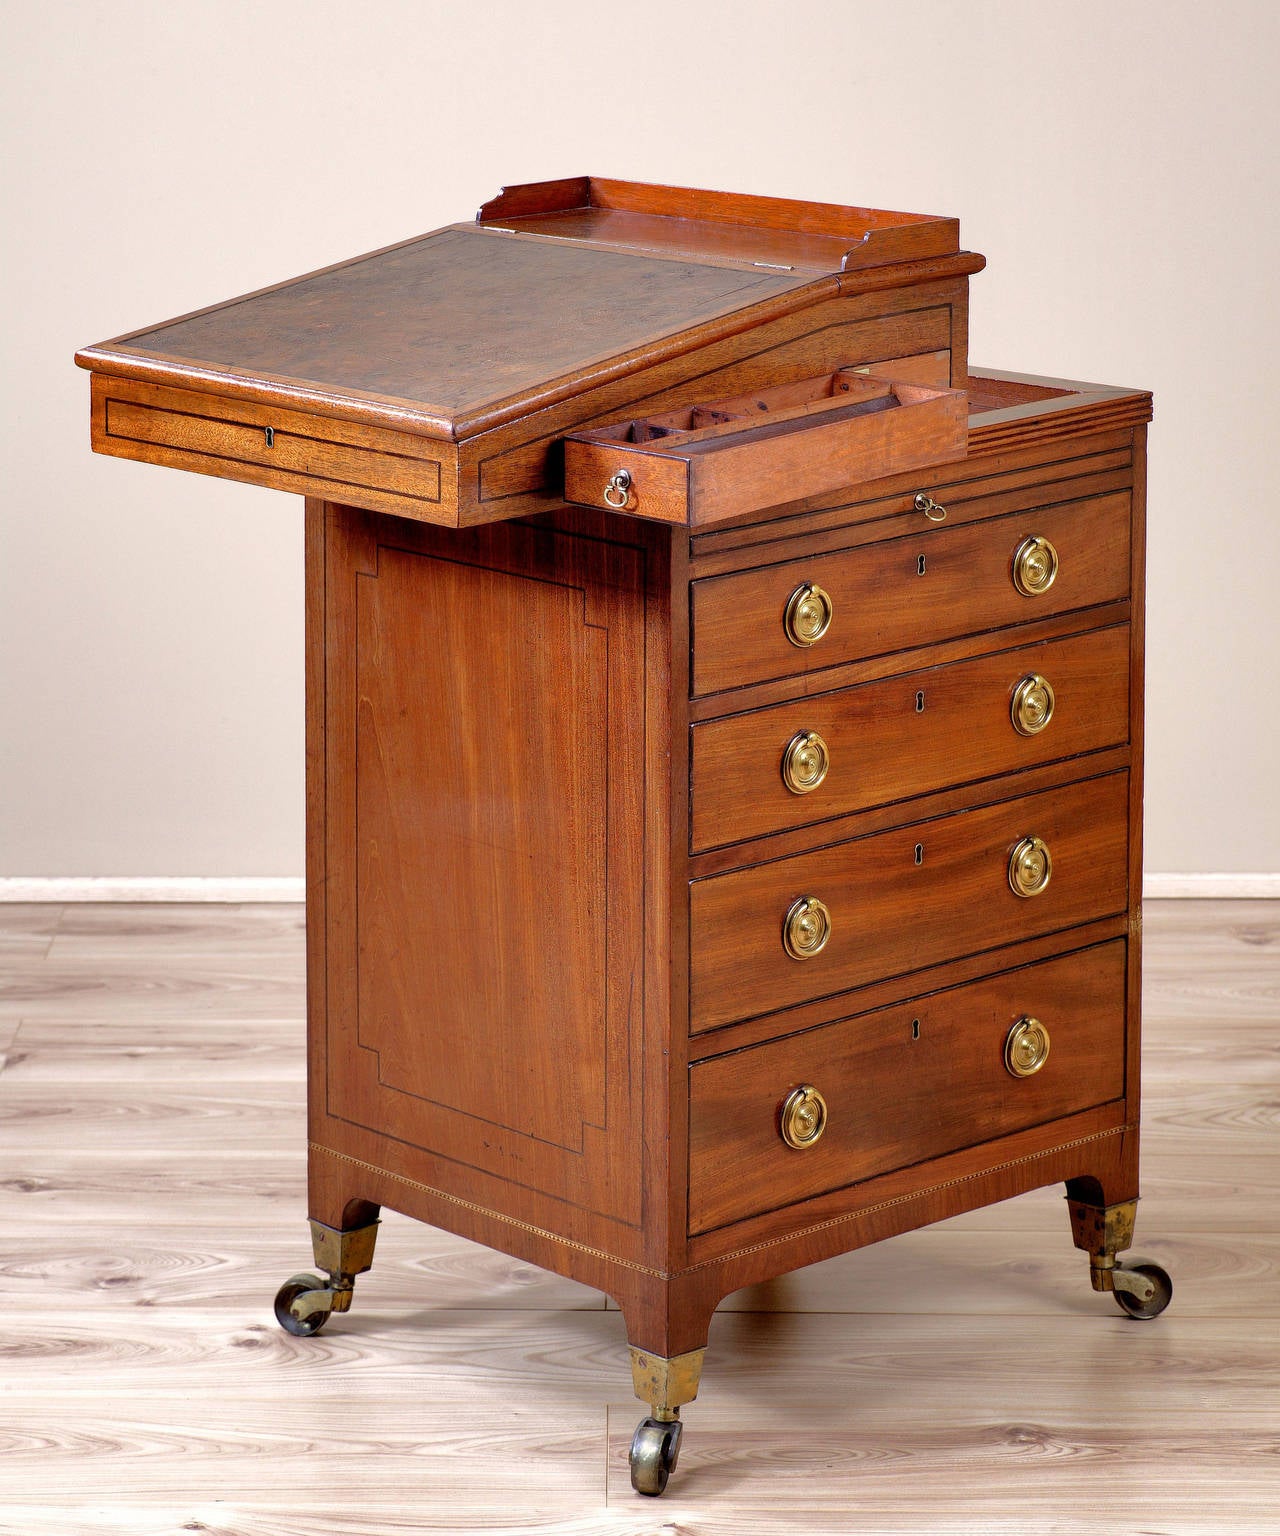 A George III Sheraton period mahogany davenport; having a pull-out pen wrest above drawers to the right hand side which are strung in ebony; the leathered writing slope opens to reveal an interior veneered in bird's eye maple. 

For more